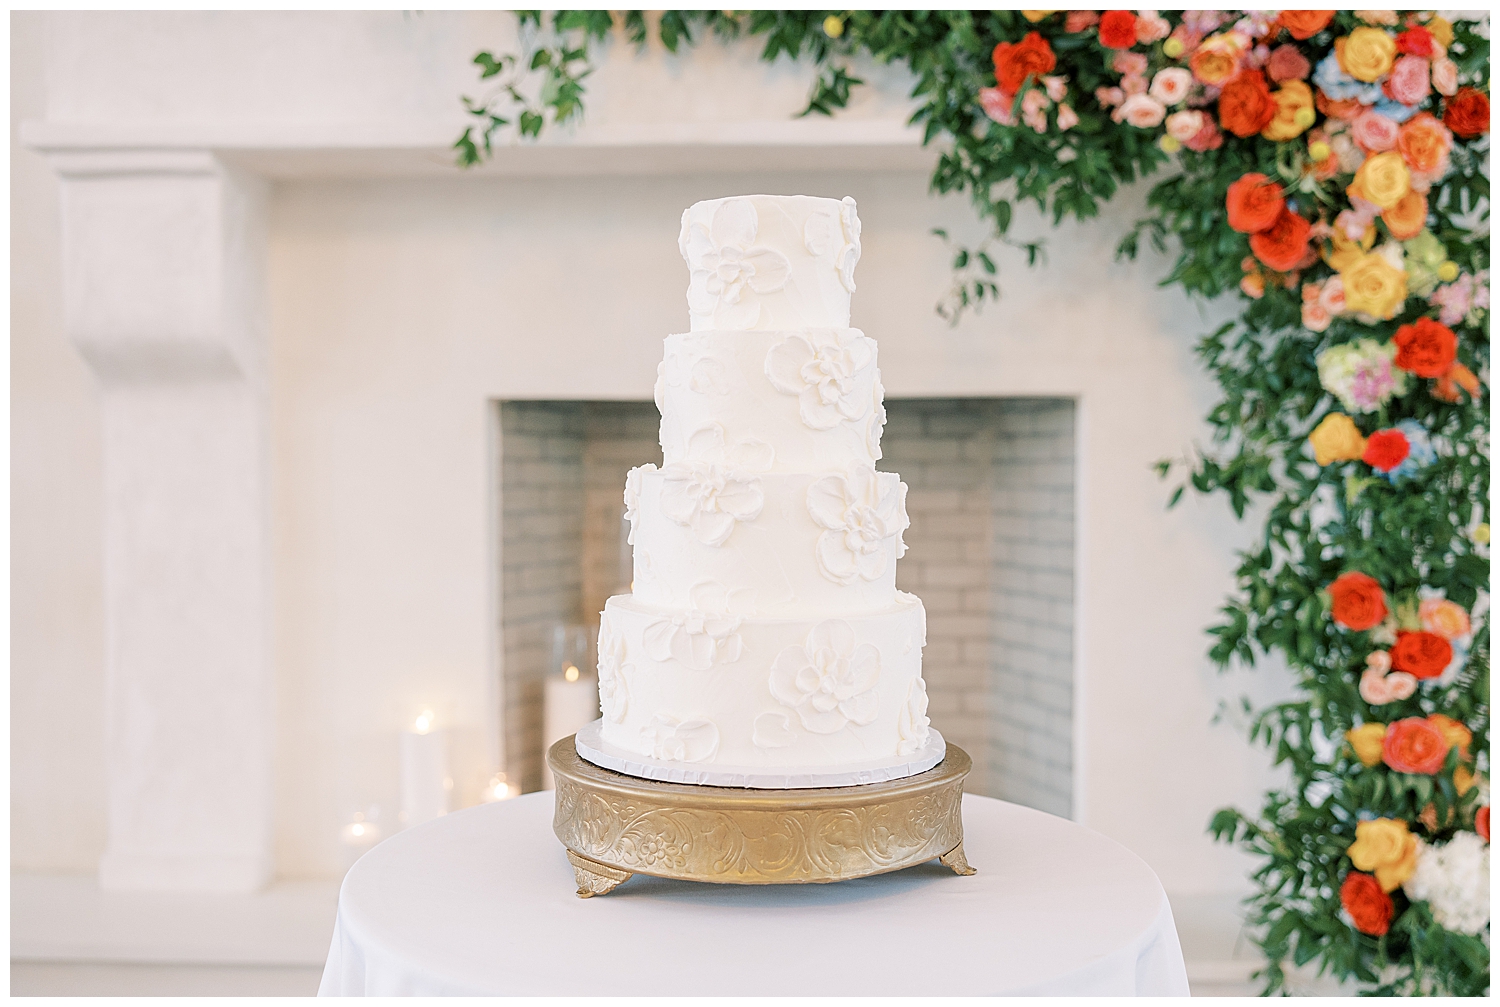 A cake sits in front of a floral arch.